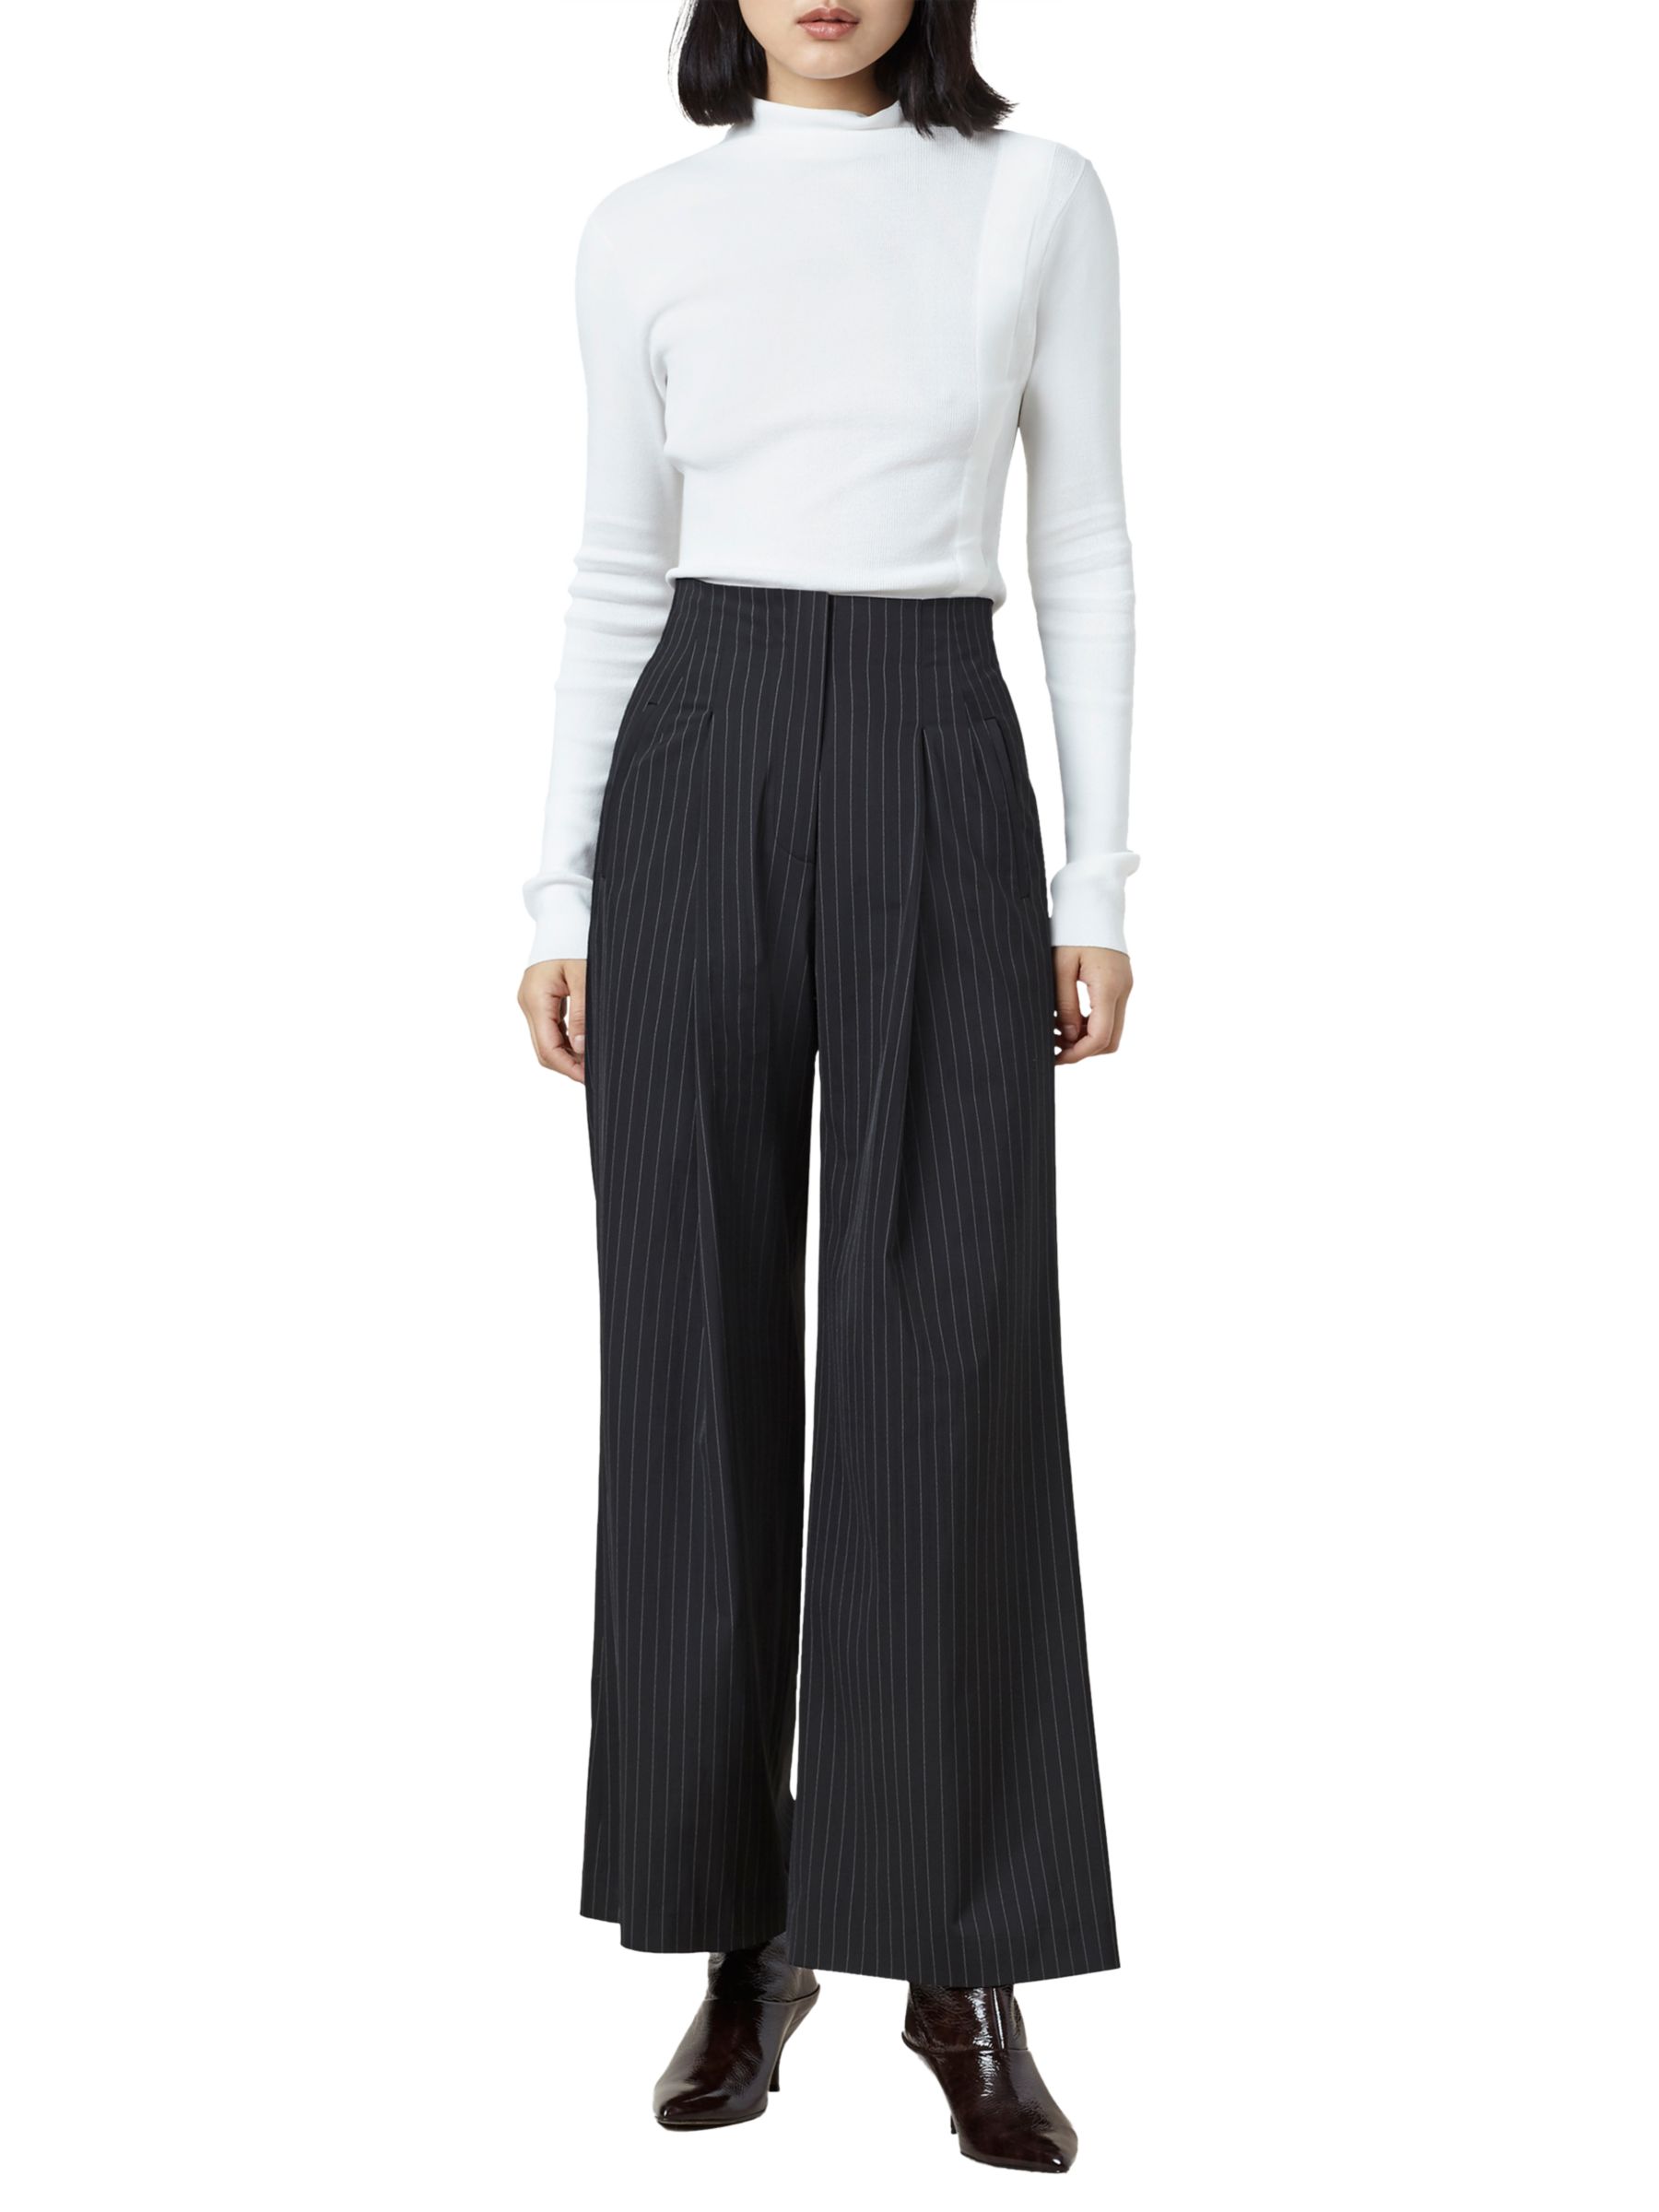 black and white pinstripe trousers